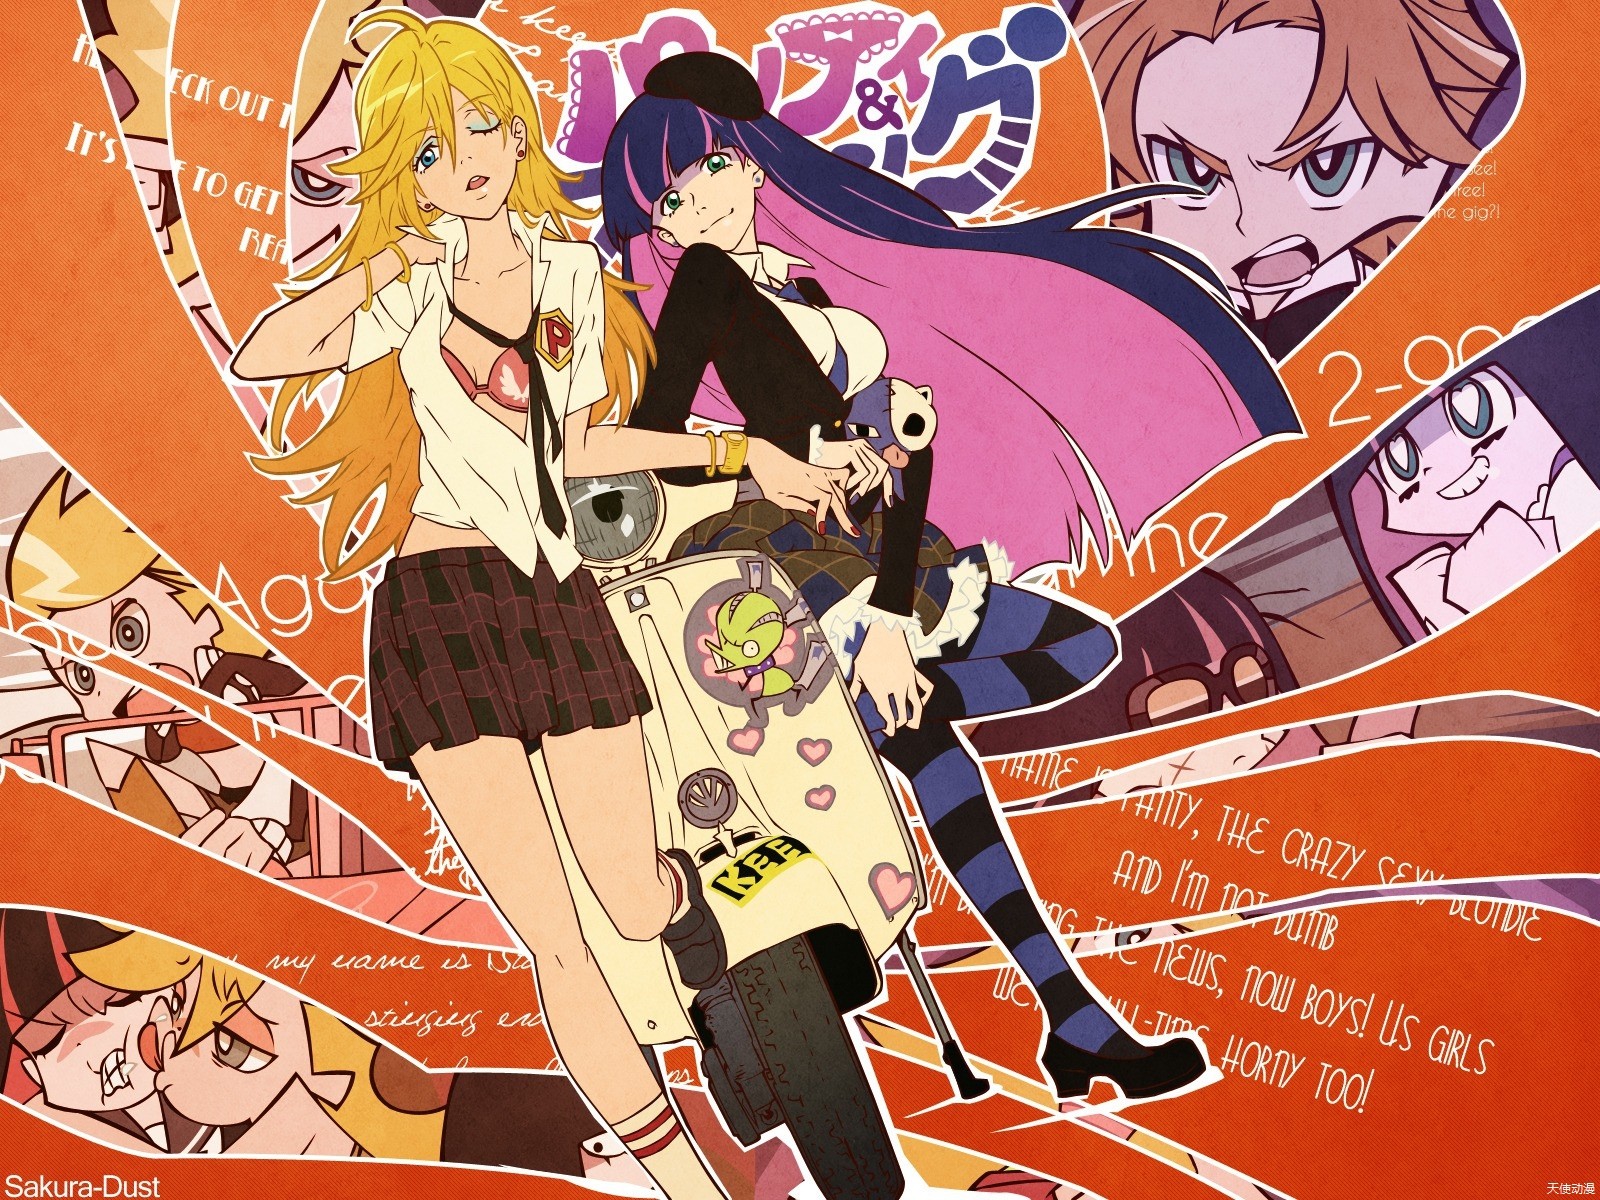 Anime 1600x1200 anime Panty and Stocking with Garterbelt Anarchy Panty Anarchy Stocking scooters women with scooters two women anime girls blonde purple hair vehicle